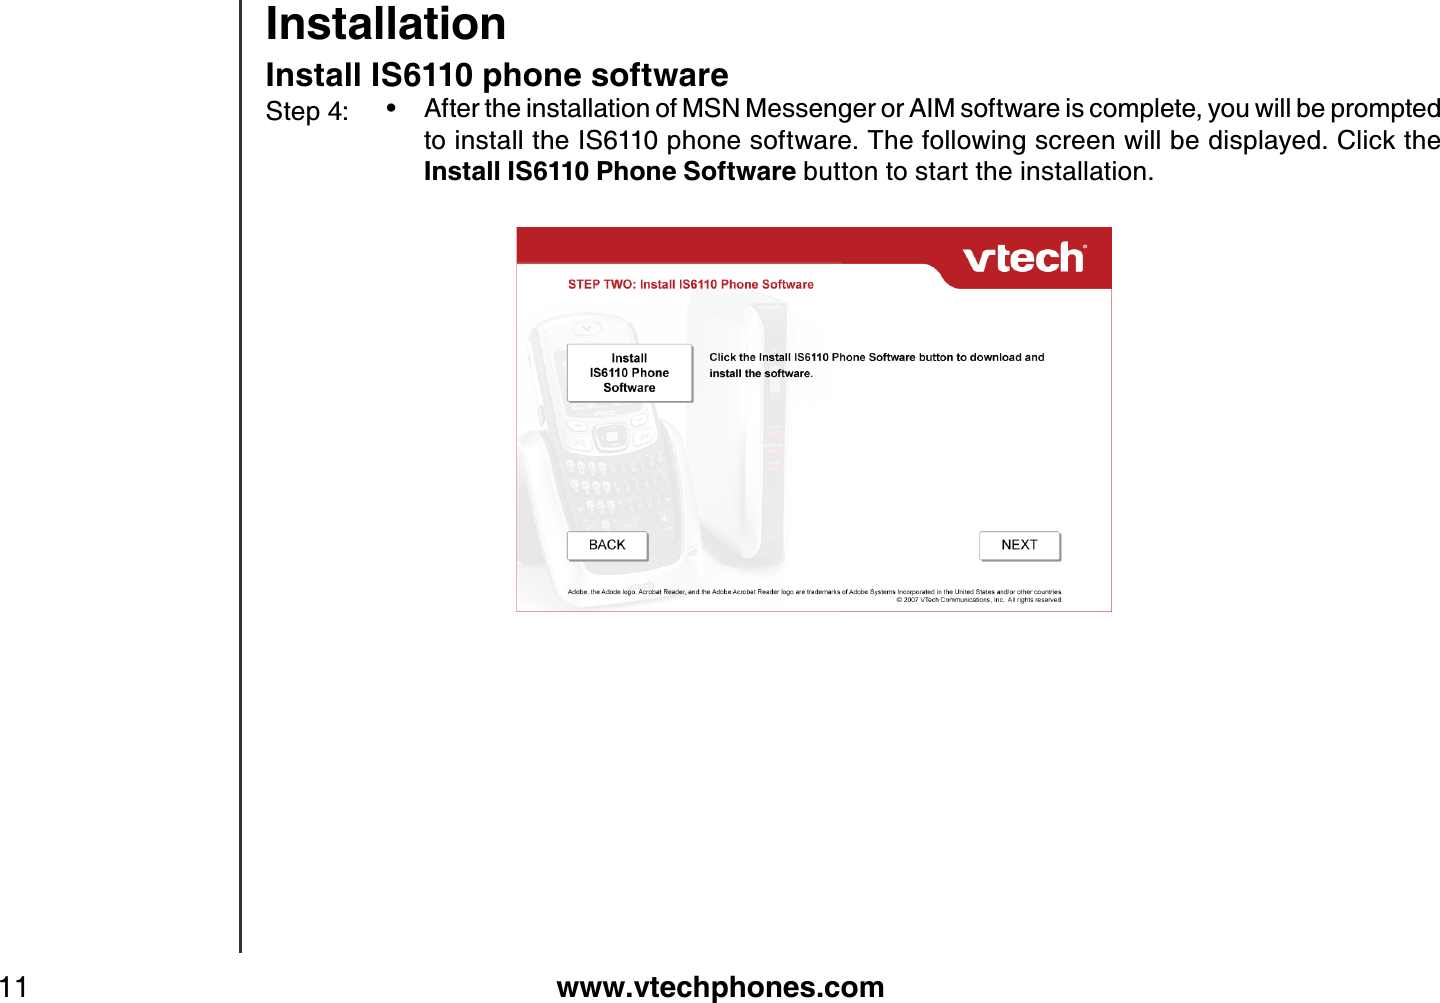 www.vtechphones.com11InstallationInstall IS6110 phone softwareAfter the installation of MSN Messenger or AIM software is complete, you will be prompted to install the IS6110 phone software. The following screen will be displayed. Click the Install IS6110 Phone Software button to start the installation.      •Step 4: